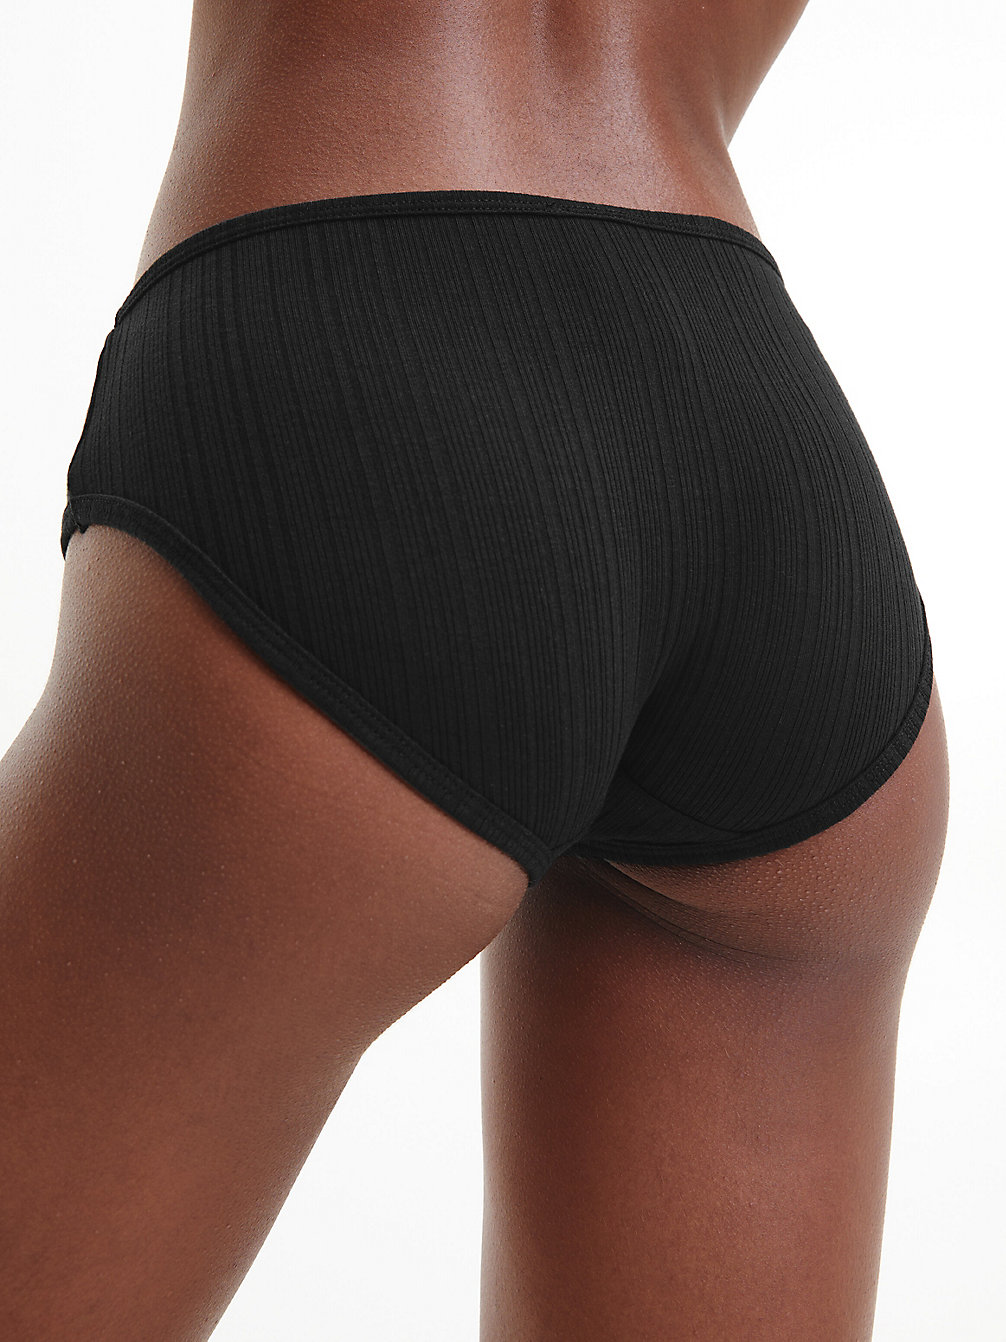 BLACK Hipster Panty - Pure Ribbed undefined women Calvin Klein